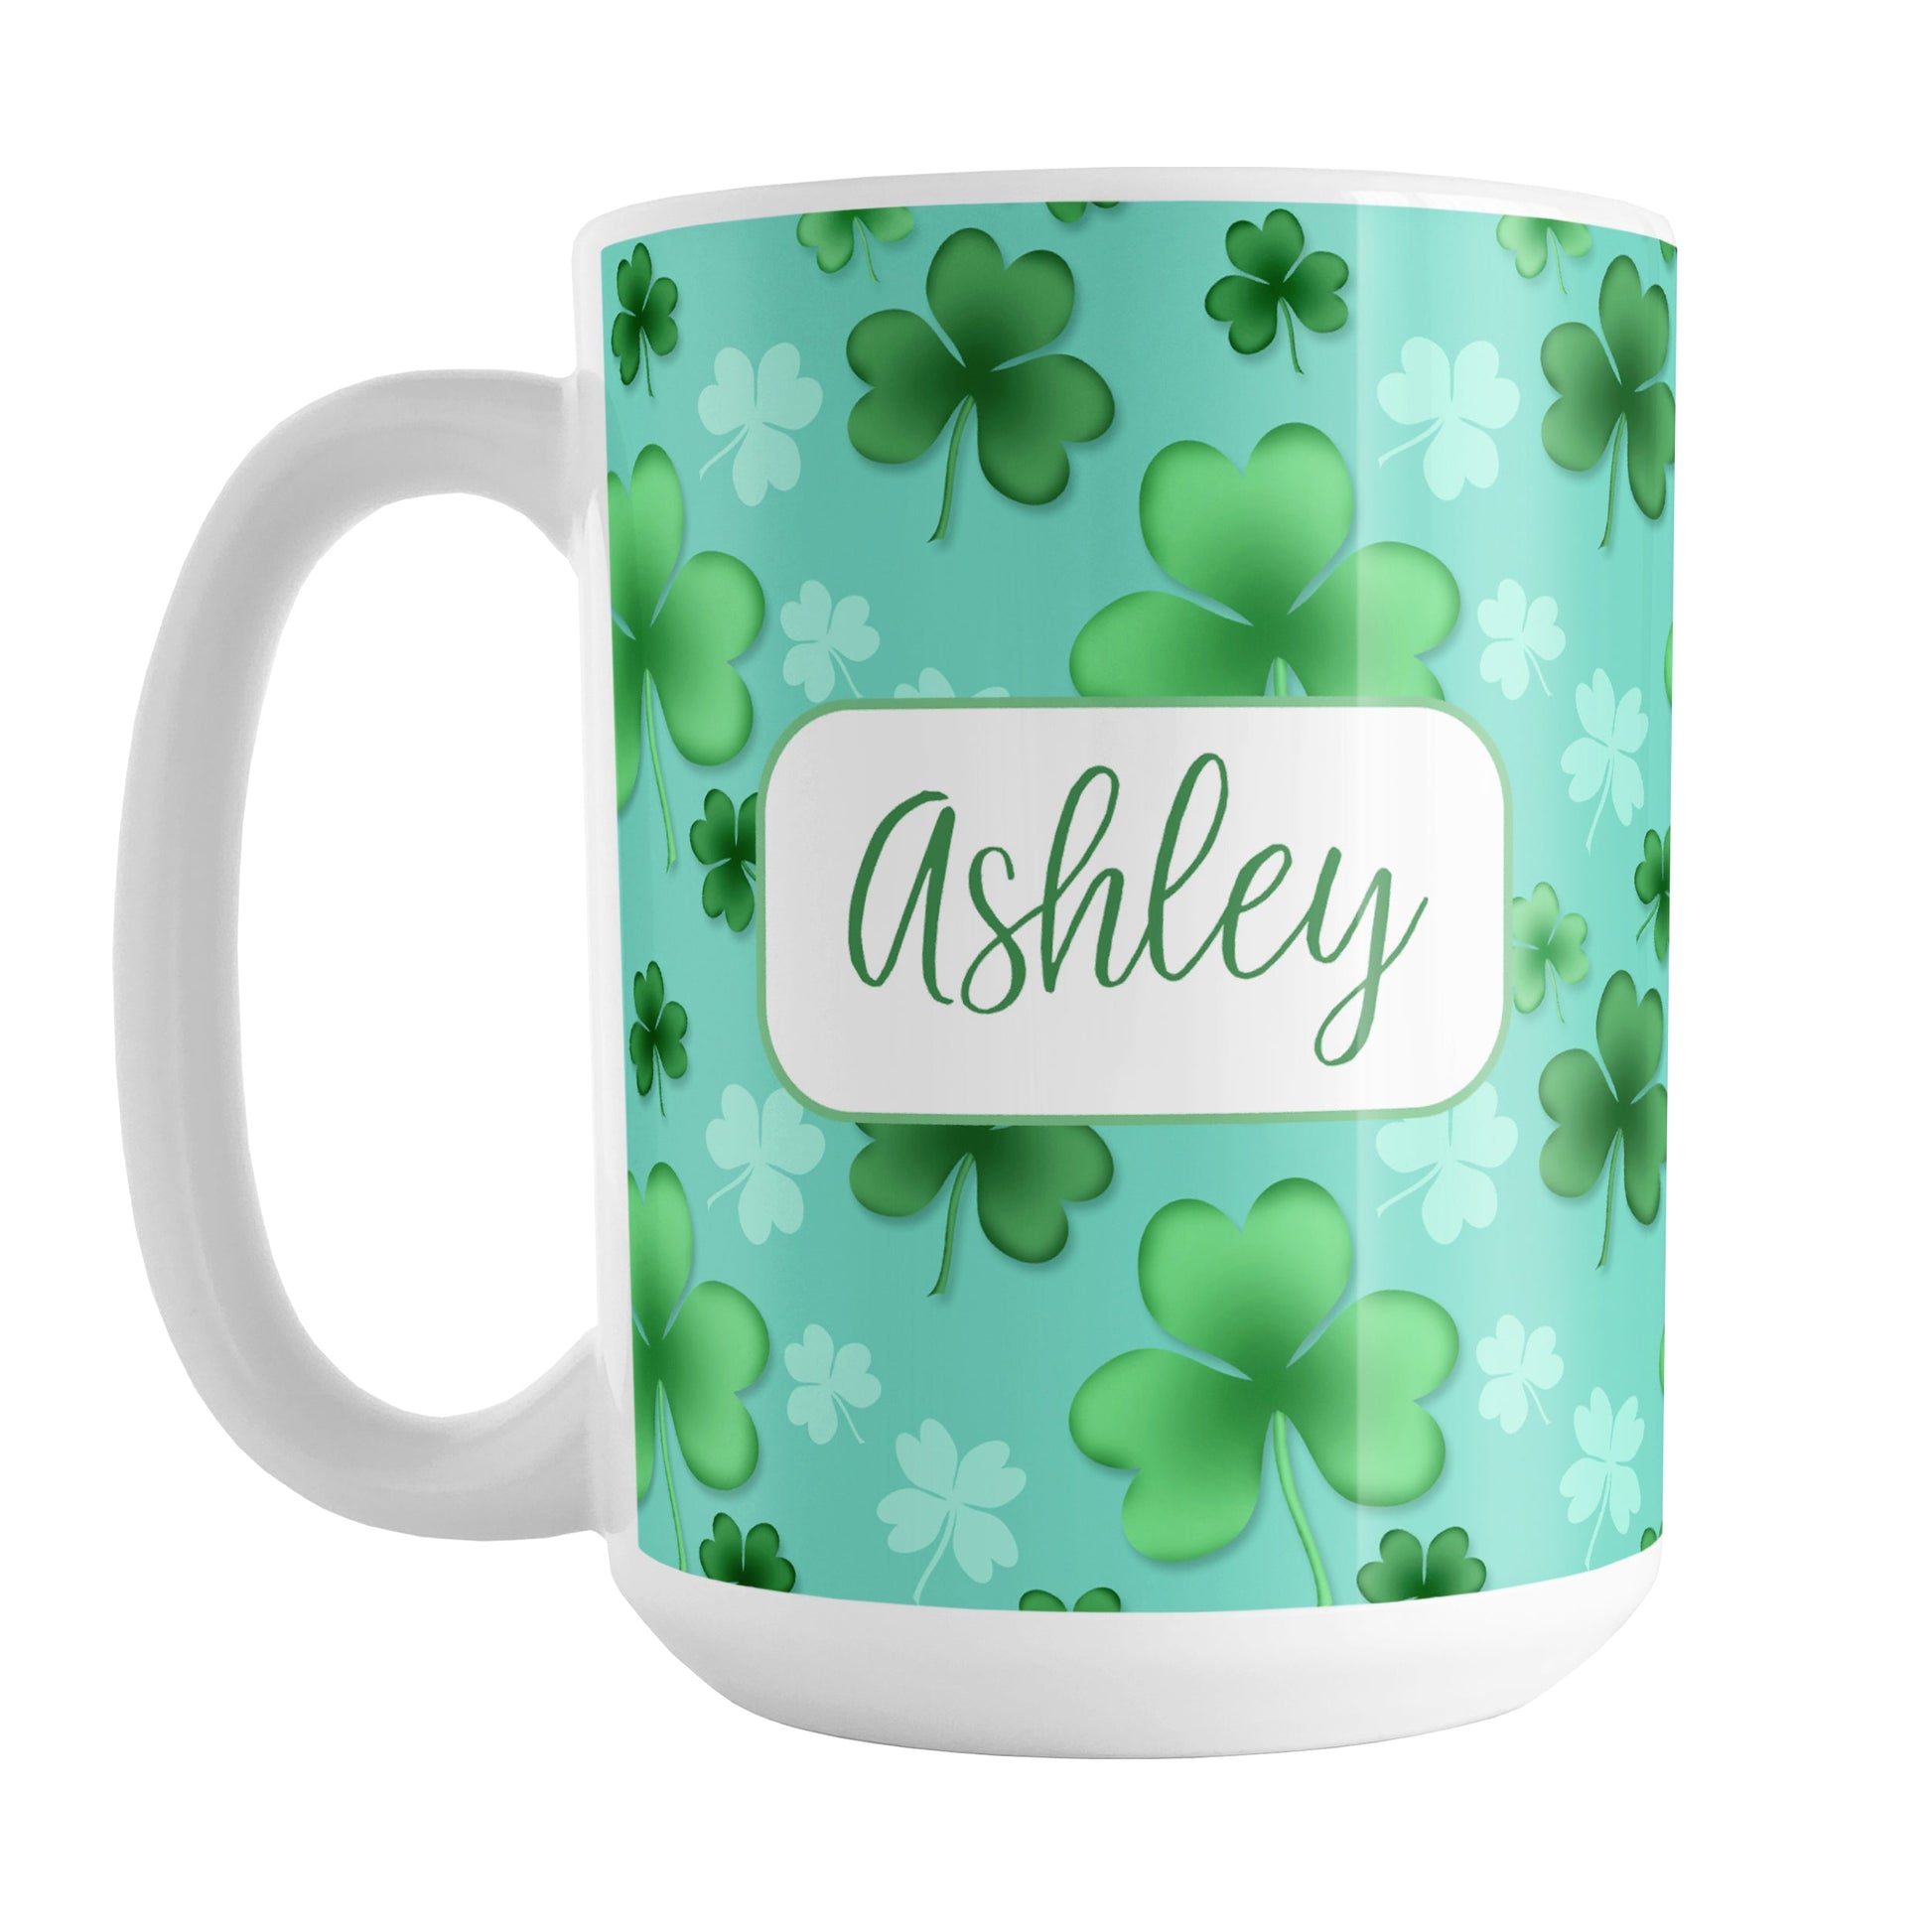 Personalized Lucky Clover Pattern Teal and Green Mug (15oz) at Amy's Coffee Mugs. A ceramic coffee mug designed with a lucky green clover pattern with a 4-leaf clover among 3-leaf clovers, in different shades of green, over a teal background that wraps around the mug to the handle. Your name is personalized in green on white, over the lucky clover pattern.